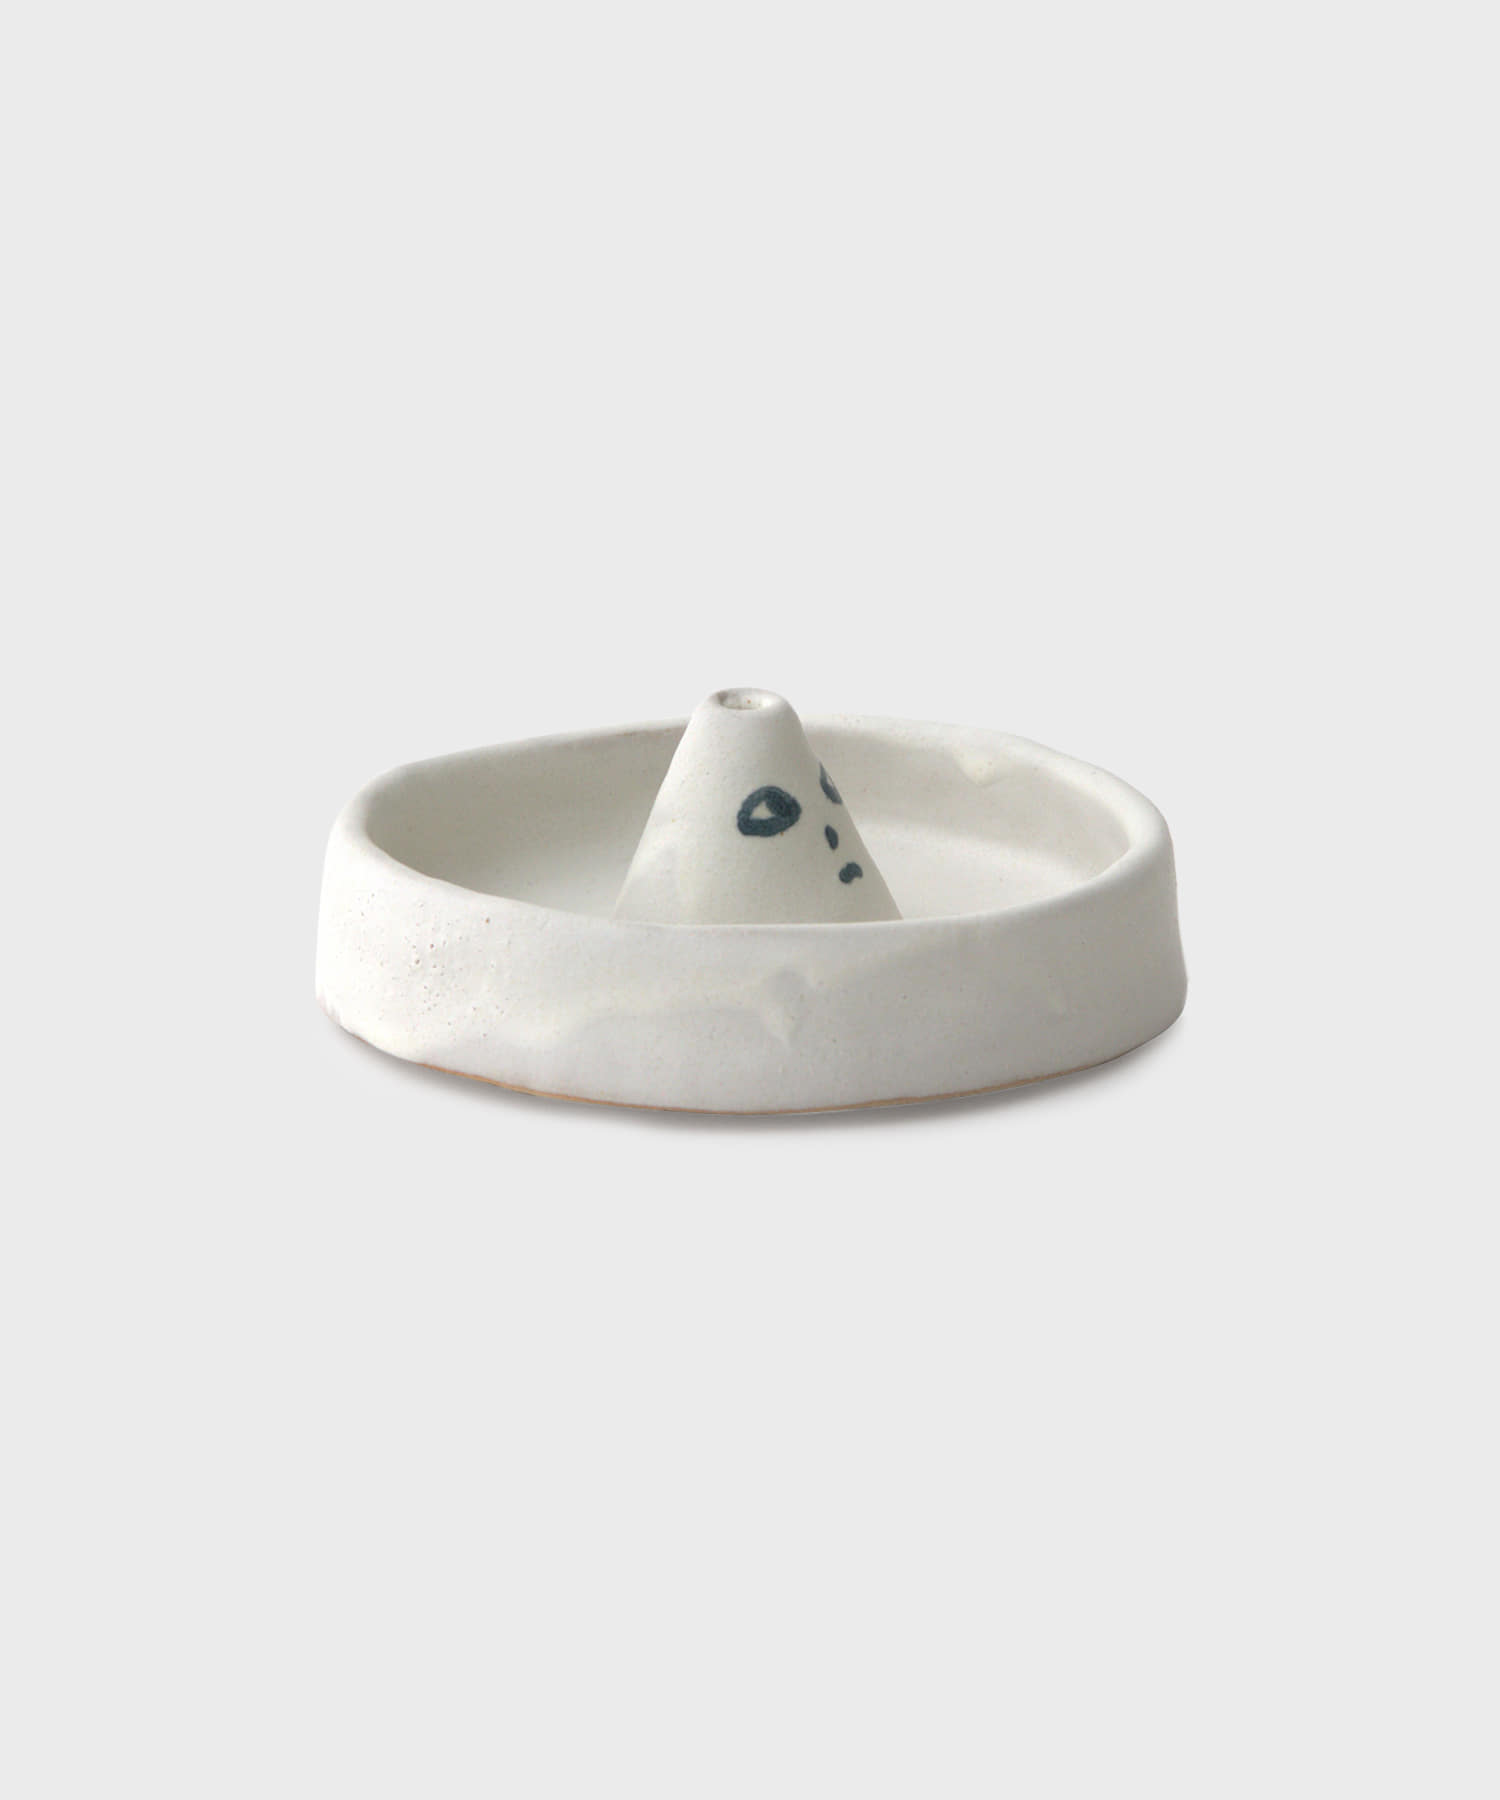 Conic Head Incense Holder with Saucer